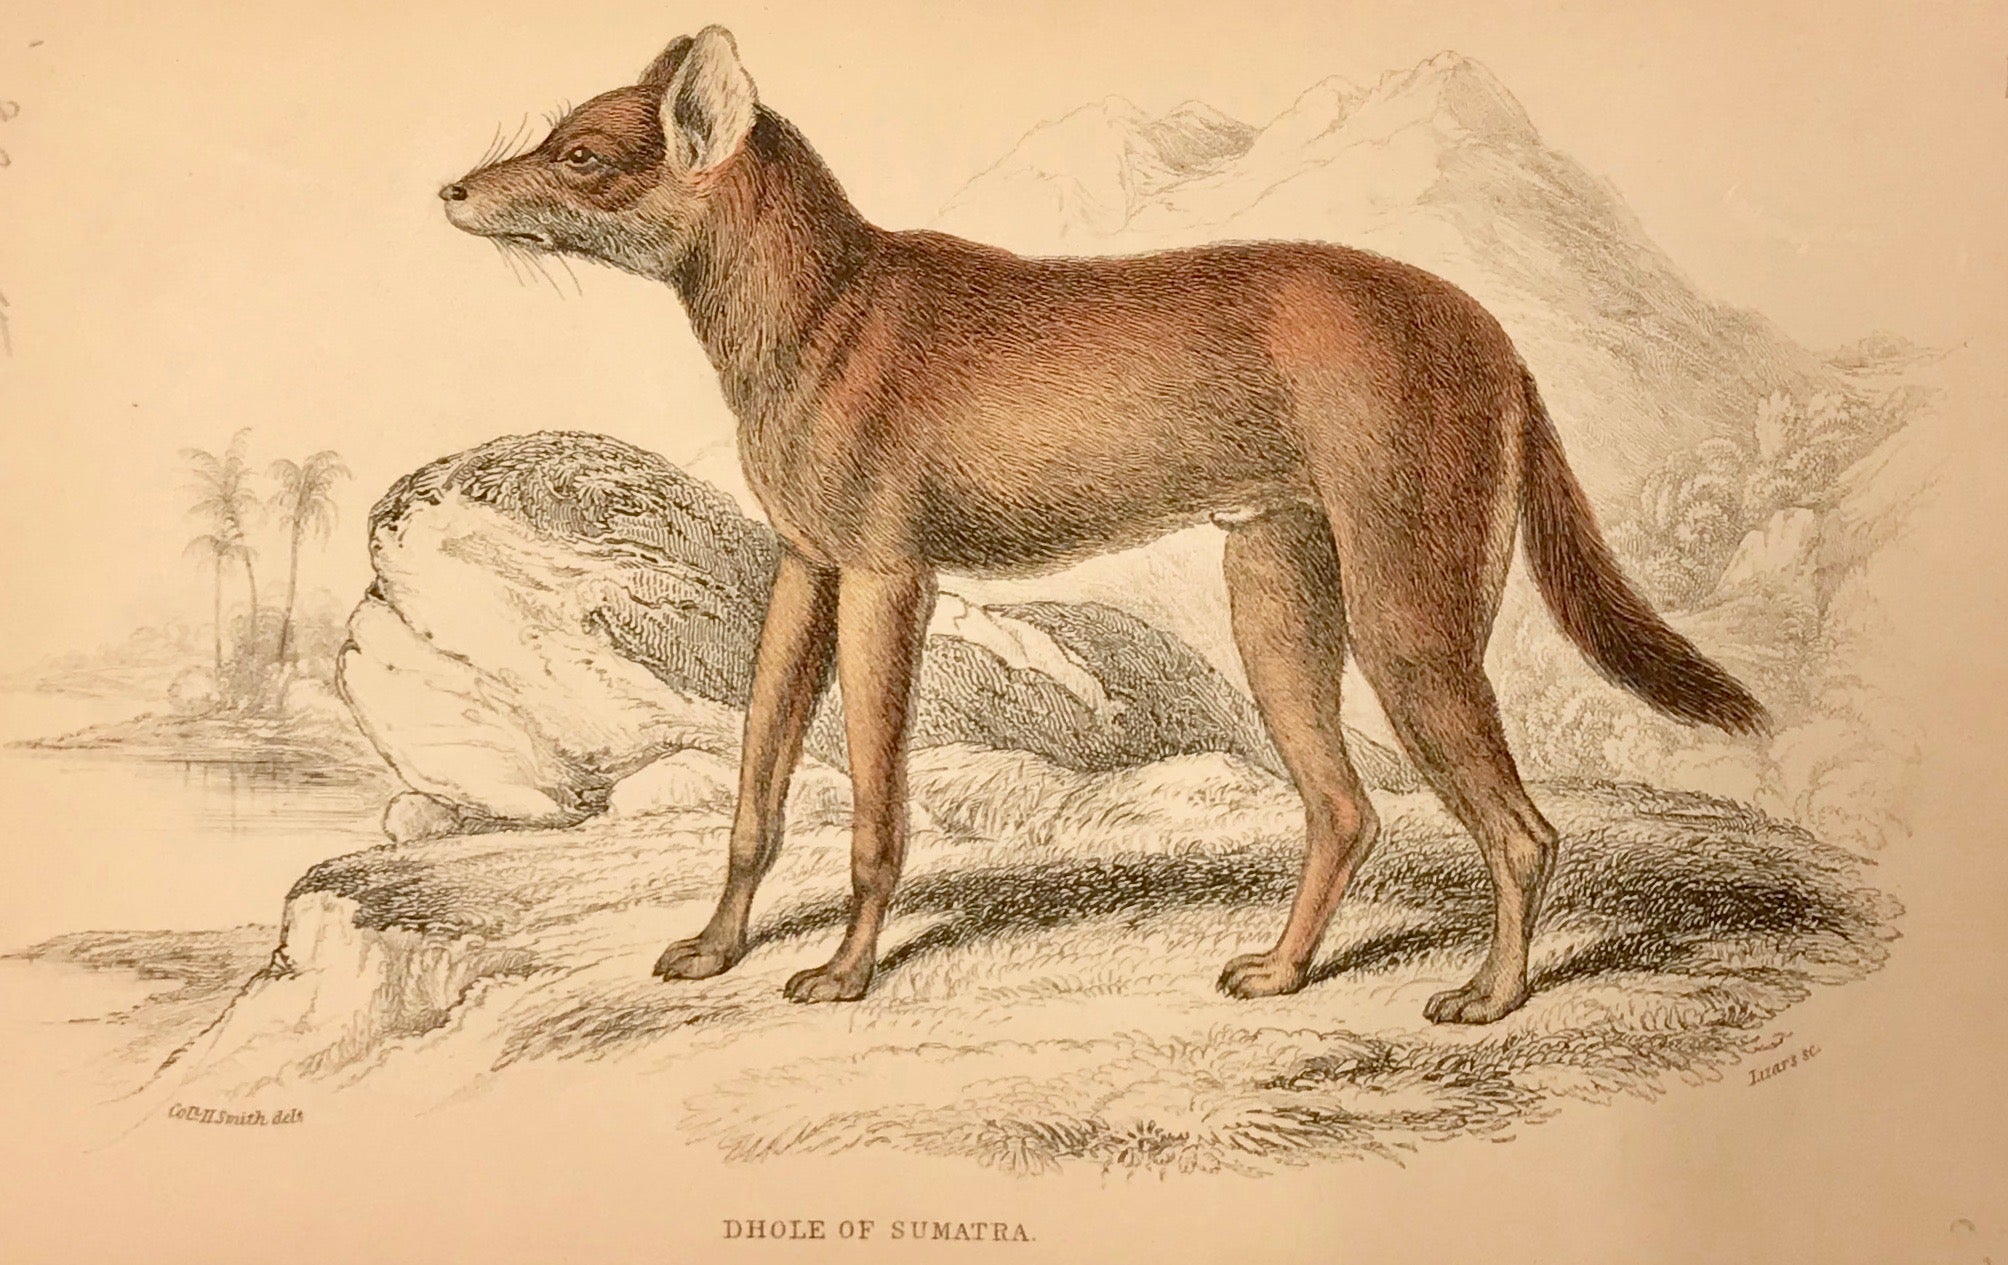 Dhole of Sumatra  Steel engraving by Lizars in original hand coloring. From "Naturalist's Library", ca 1860. Light age toning.